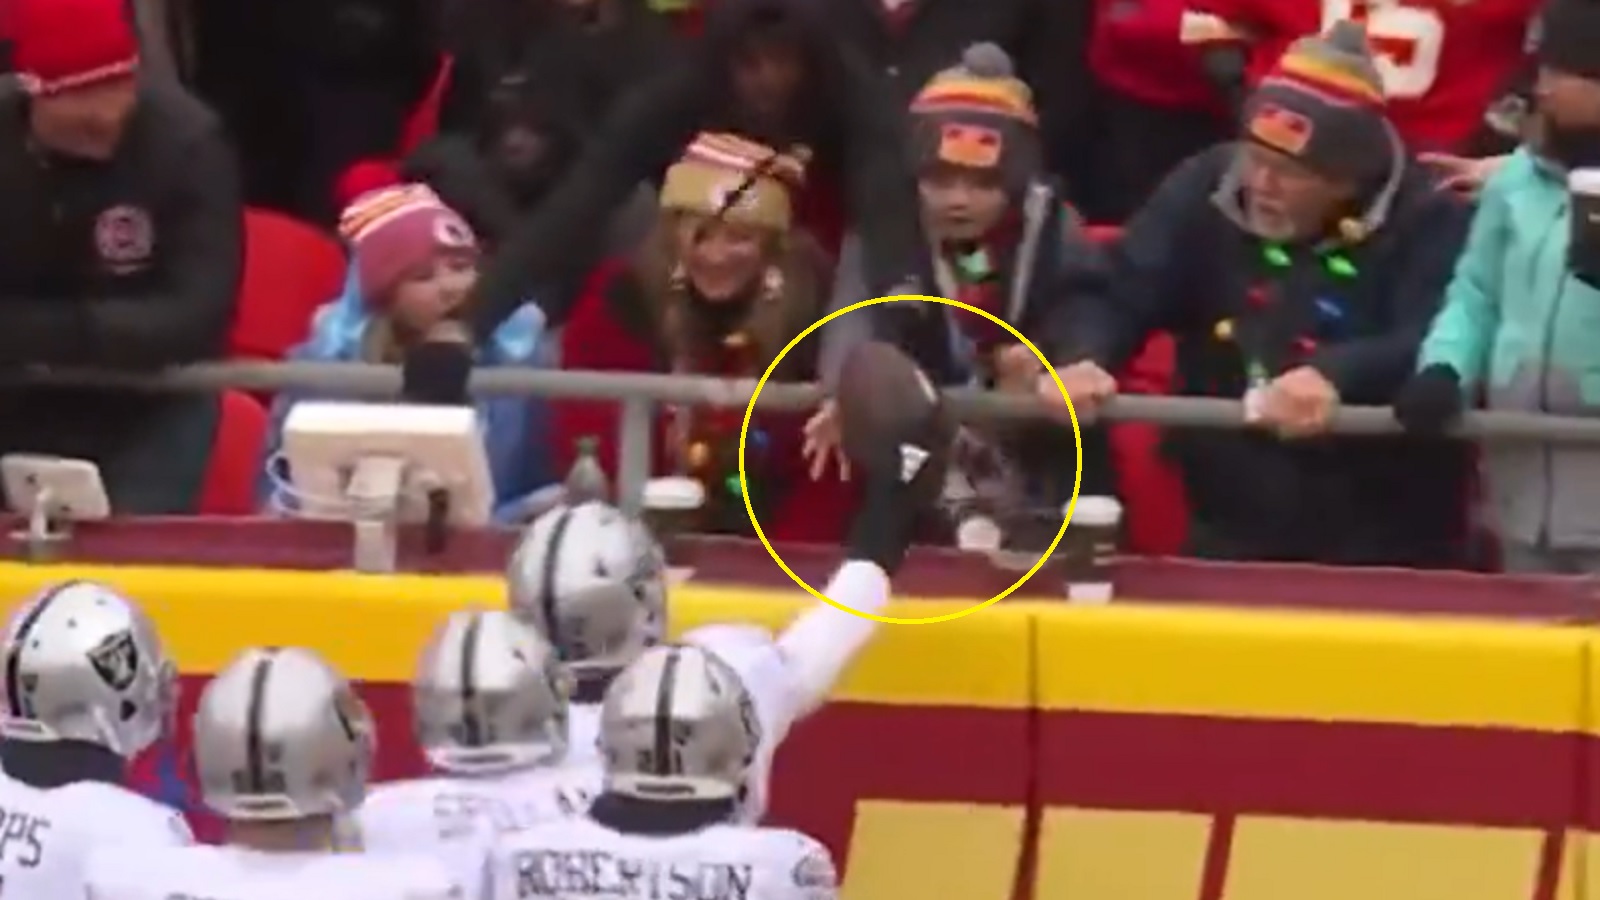 Raiders' Jack Jones Explained Why He Seemed to Pull TD Ball Away From  Chiefs Fan - Sports Illustrated